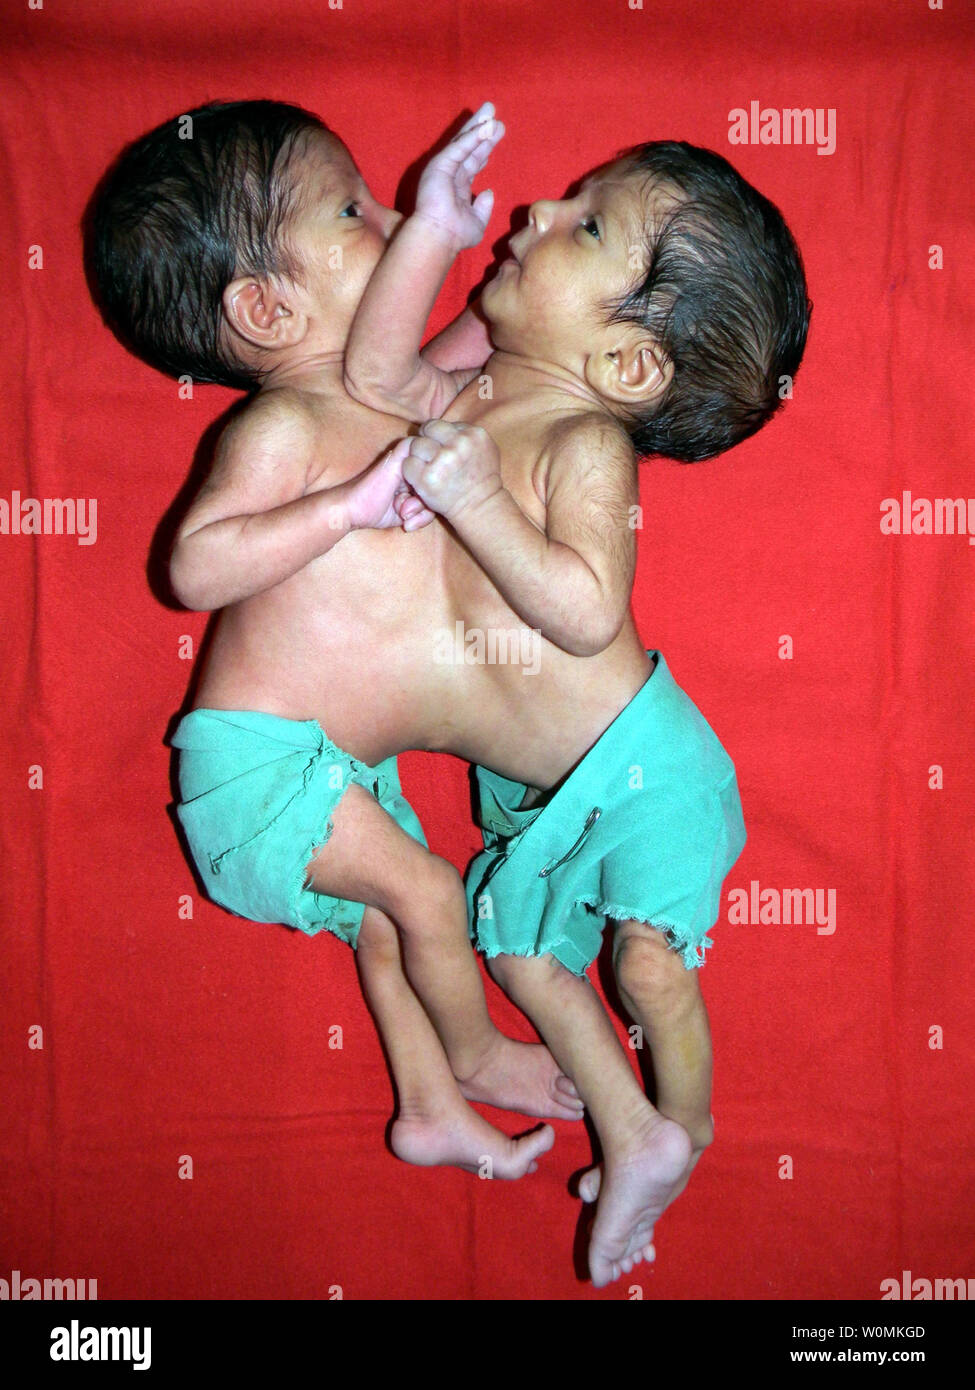 Formerly conjoined twins, Stuti and Aradhana are seen in this pre-operation file photo at Missionary Hospital in Padhar, Betul, in central India. The one-year-olds were successfully separated after a 12-hour surgery on June 20, 2012, conducted by a team of 34 medical experts, including 23 doctors, drawn from India and abroad.The one-year-old sisters were joined at heart and liver.            UPI Photo/ STR.                               . Stock Photo